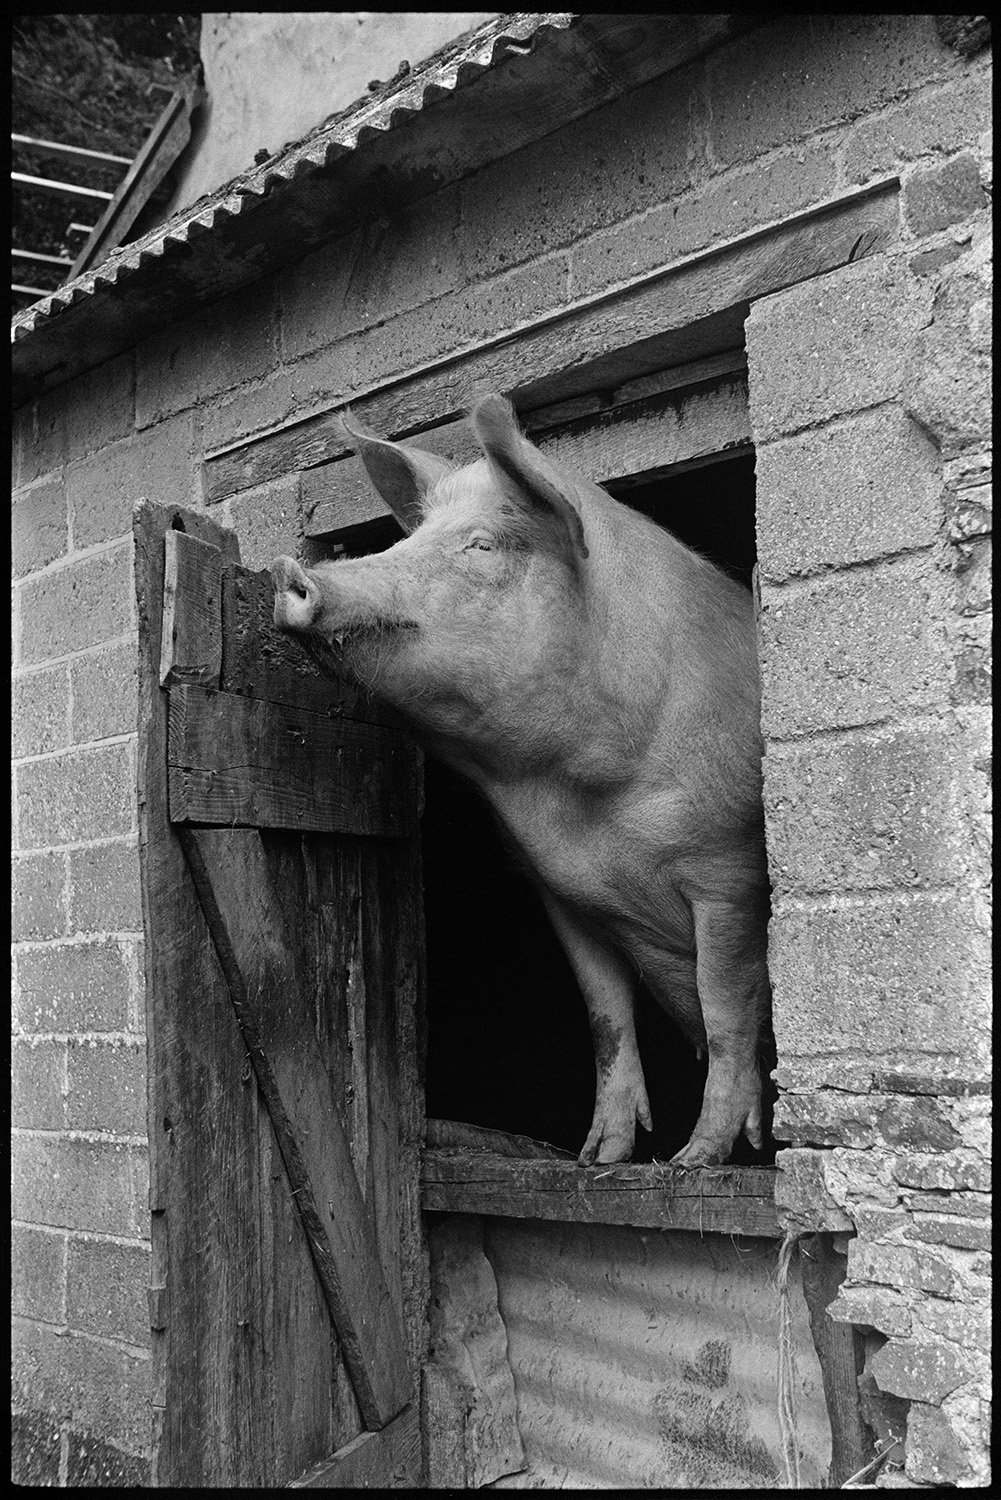 Pig looking out of pigsty in barn. 
[A pig looking over a makeshift corrugated iron stable door to a barn at Ashwell, Dolton. The pigs front trotters are resting on the top of the door.]